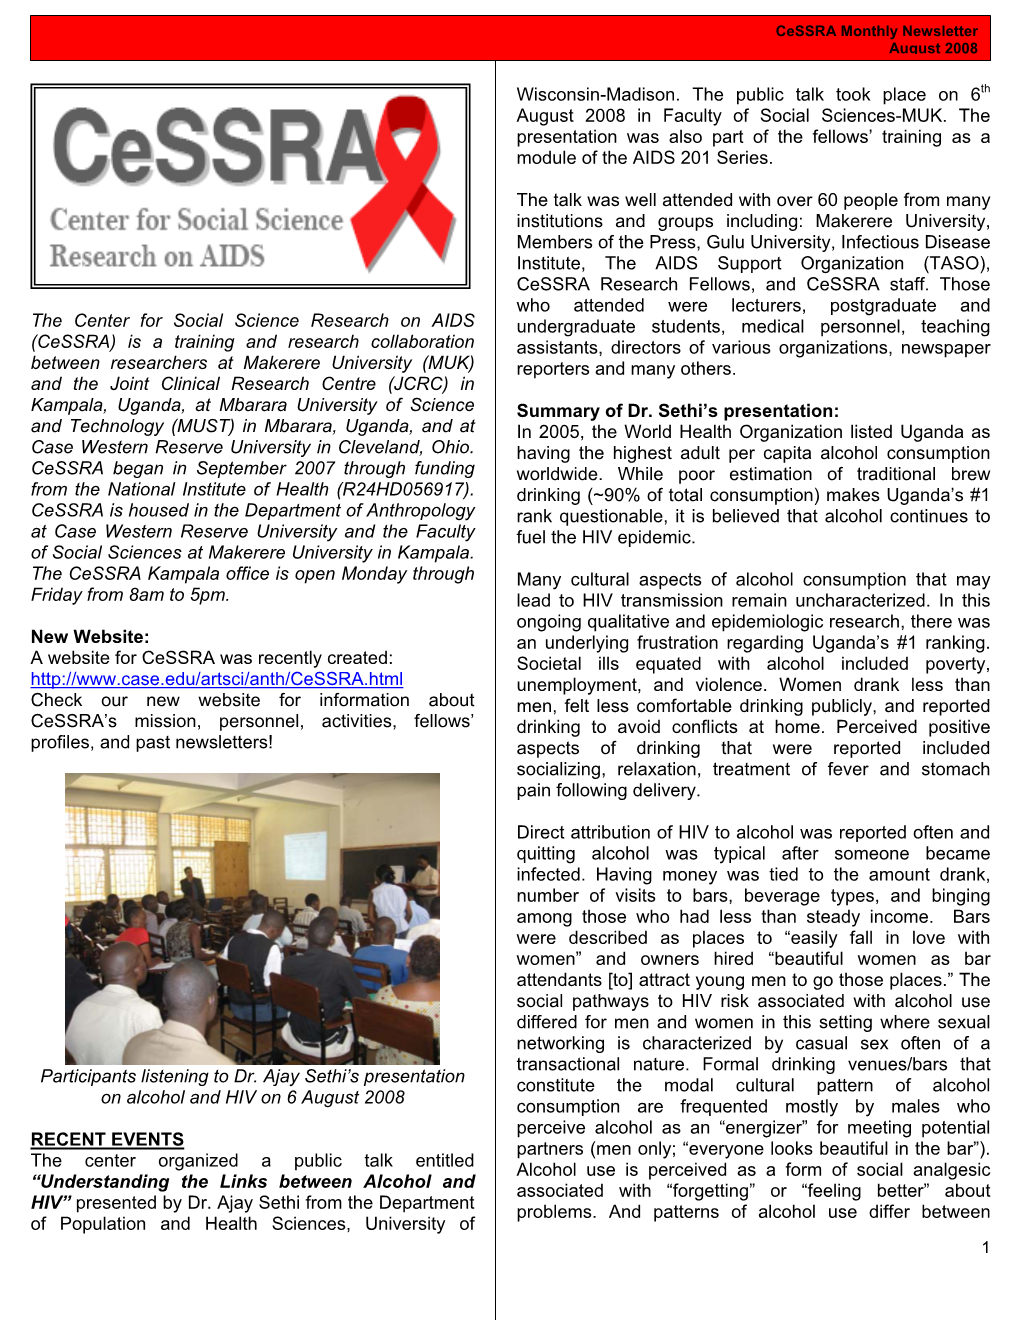 The Center for Social Science Research on AIDS (Cessra) Is A